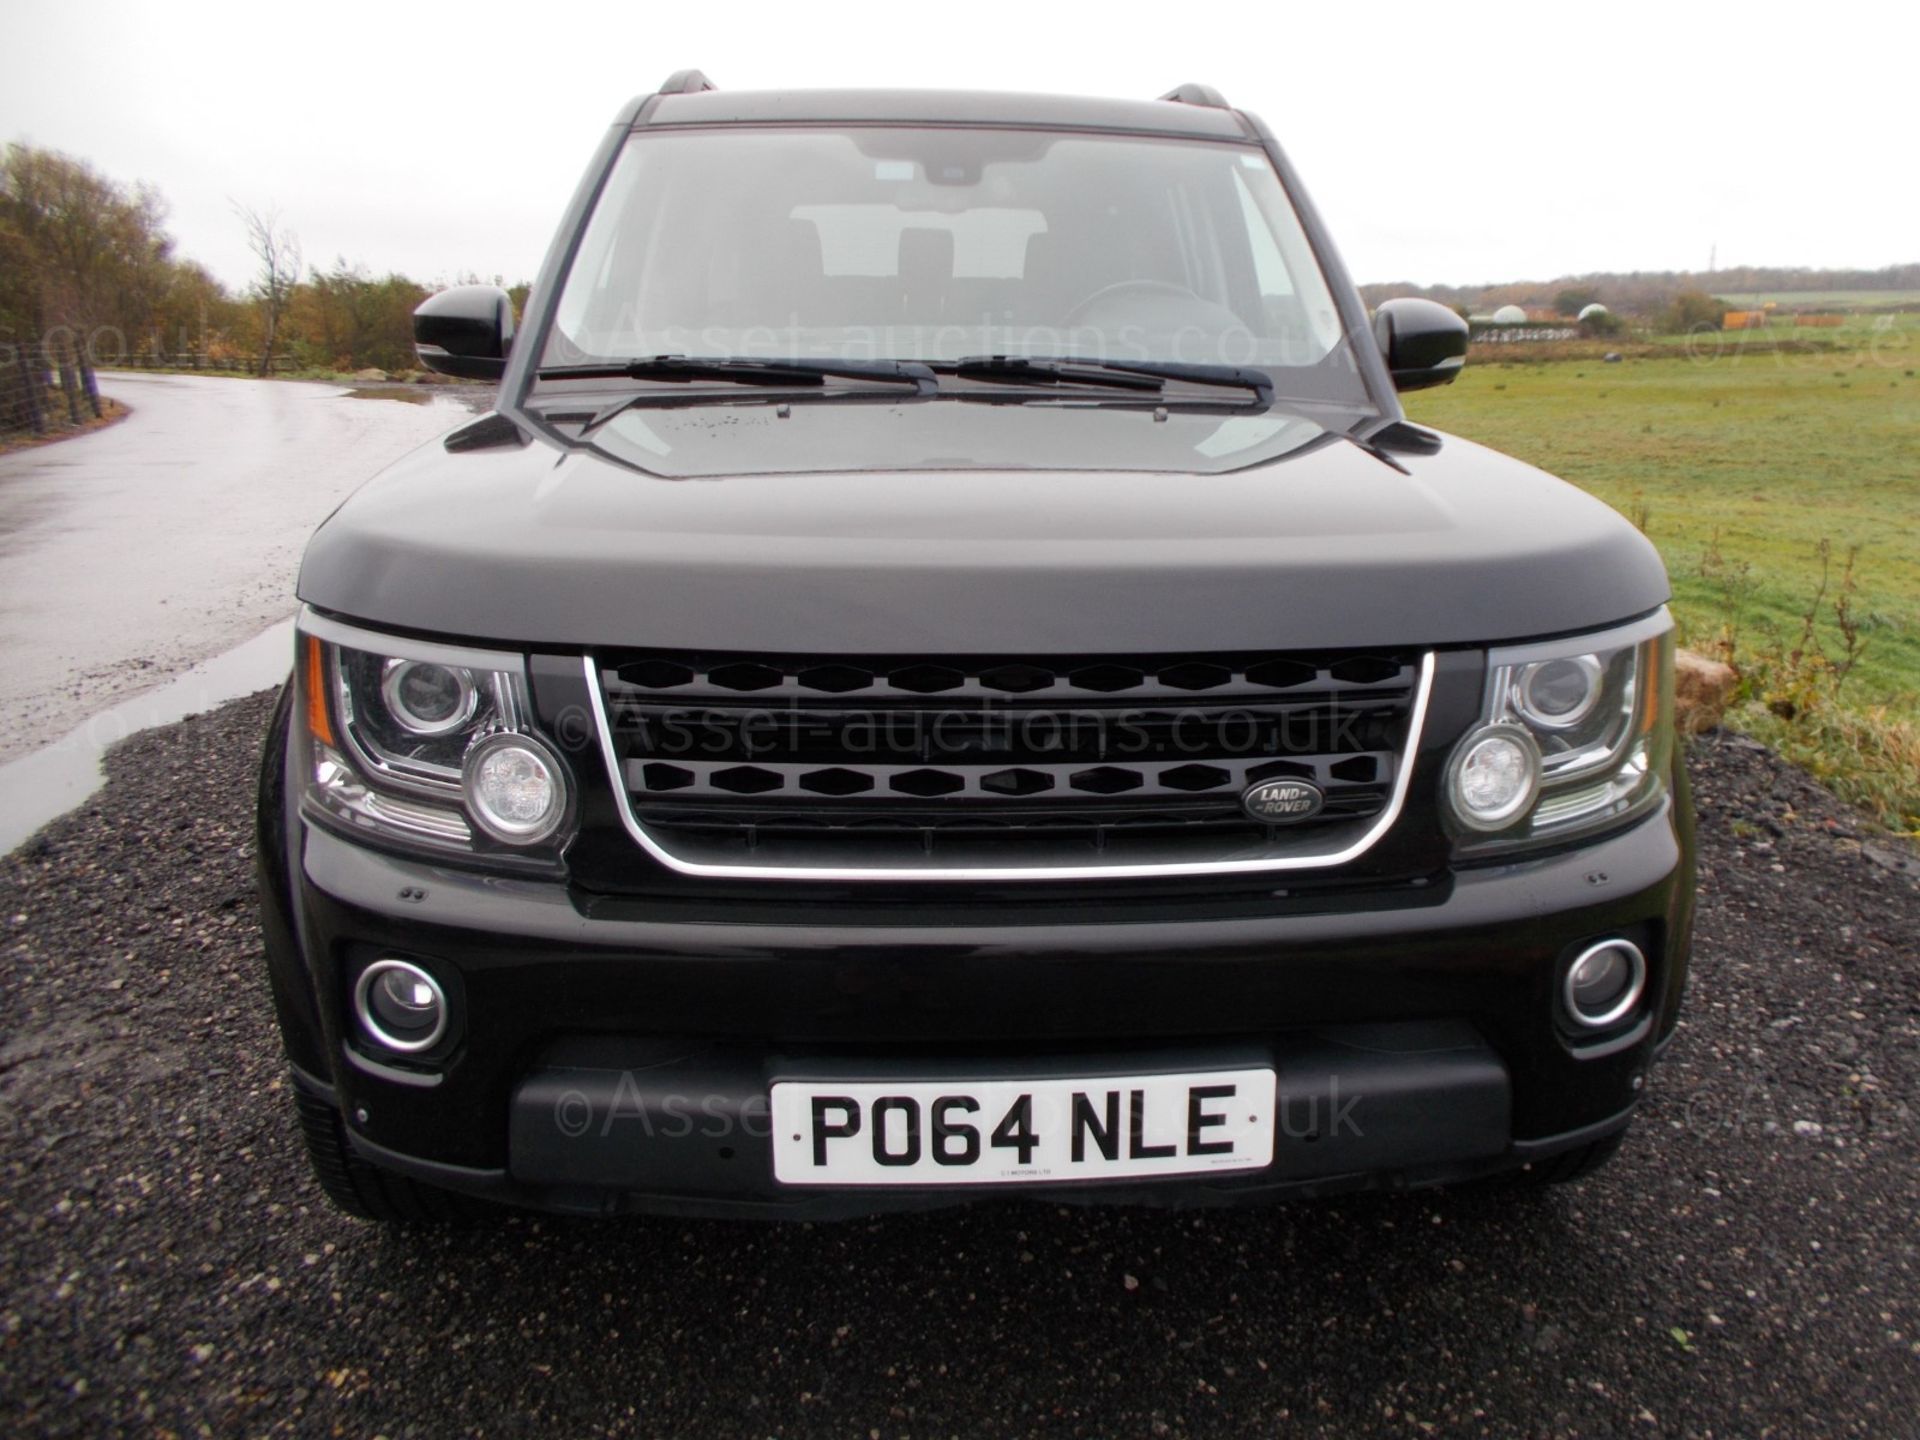 2015/64 LAND ROVER DISCOVERY HSE LUXURY SCV6 7 SEATER, 3.0 V6 PETROL SUPERCHARGED *PLUS VAT* - Image 2 of 27